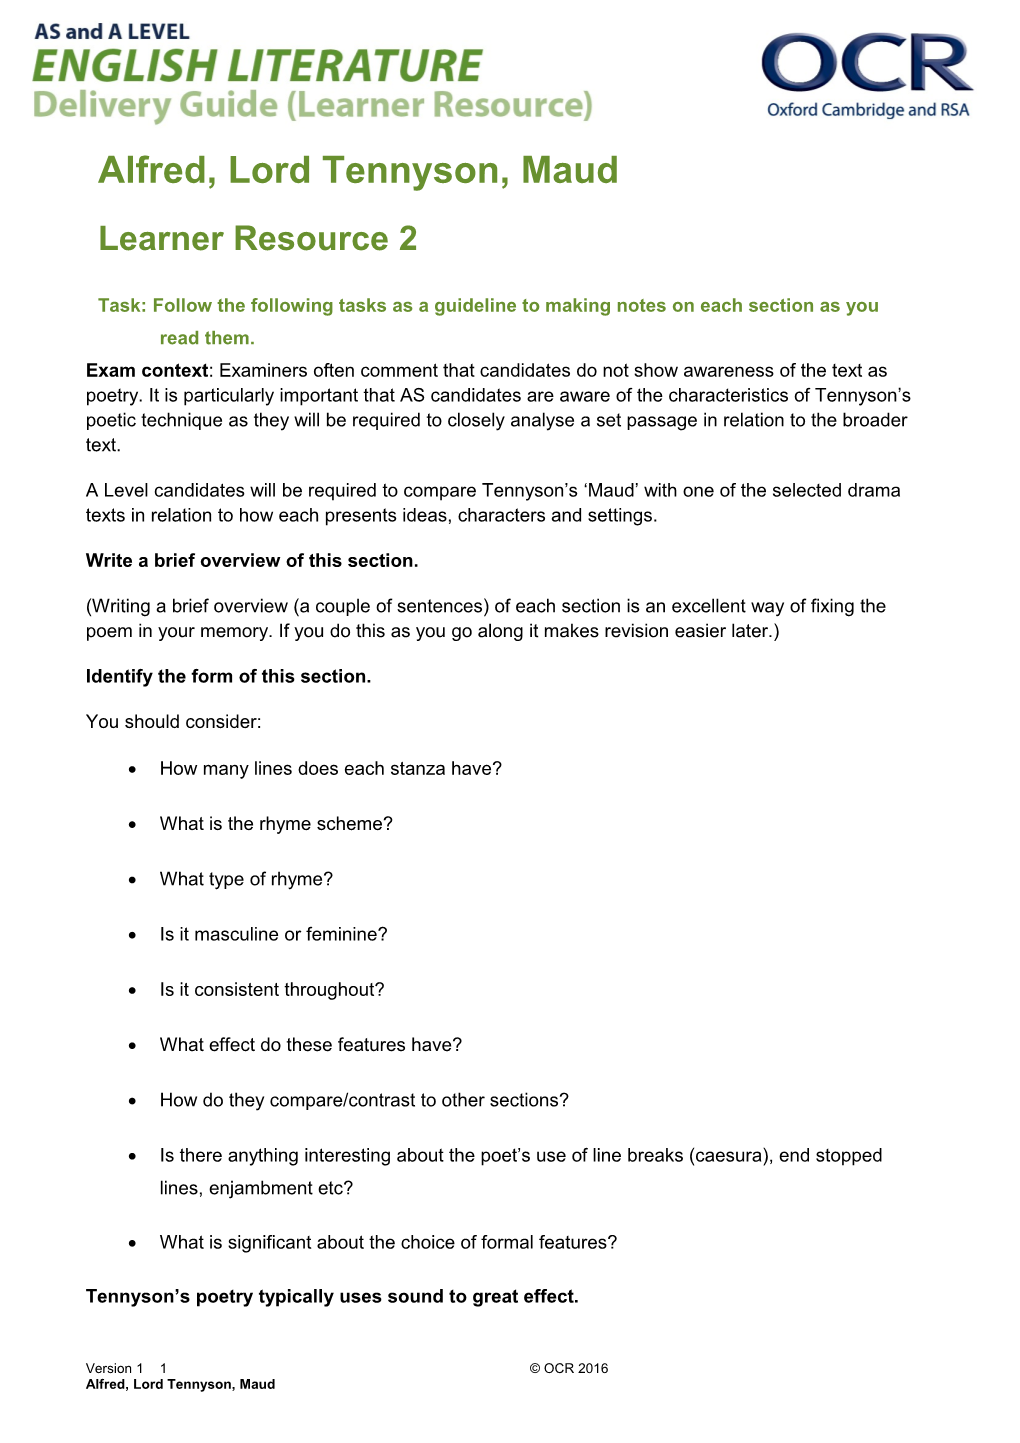 OCR a and AS Level English Literature, Alfred, Lord Tennyson - Maud Learner Resource 2